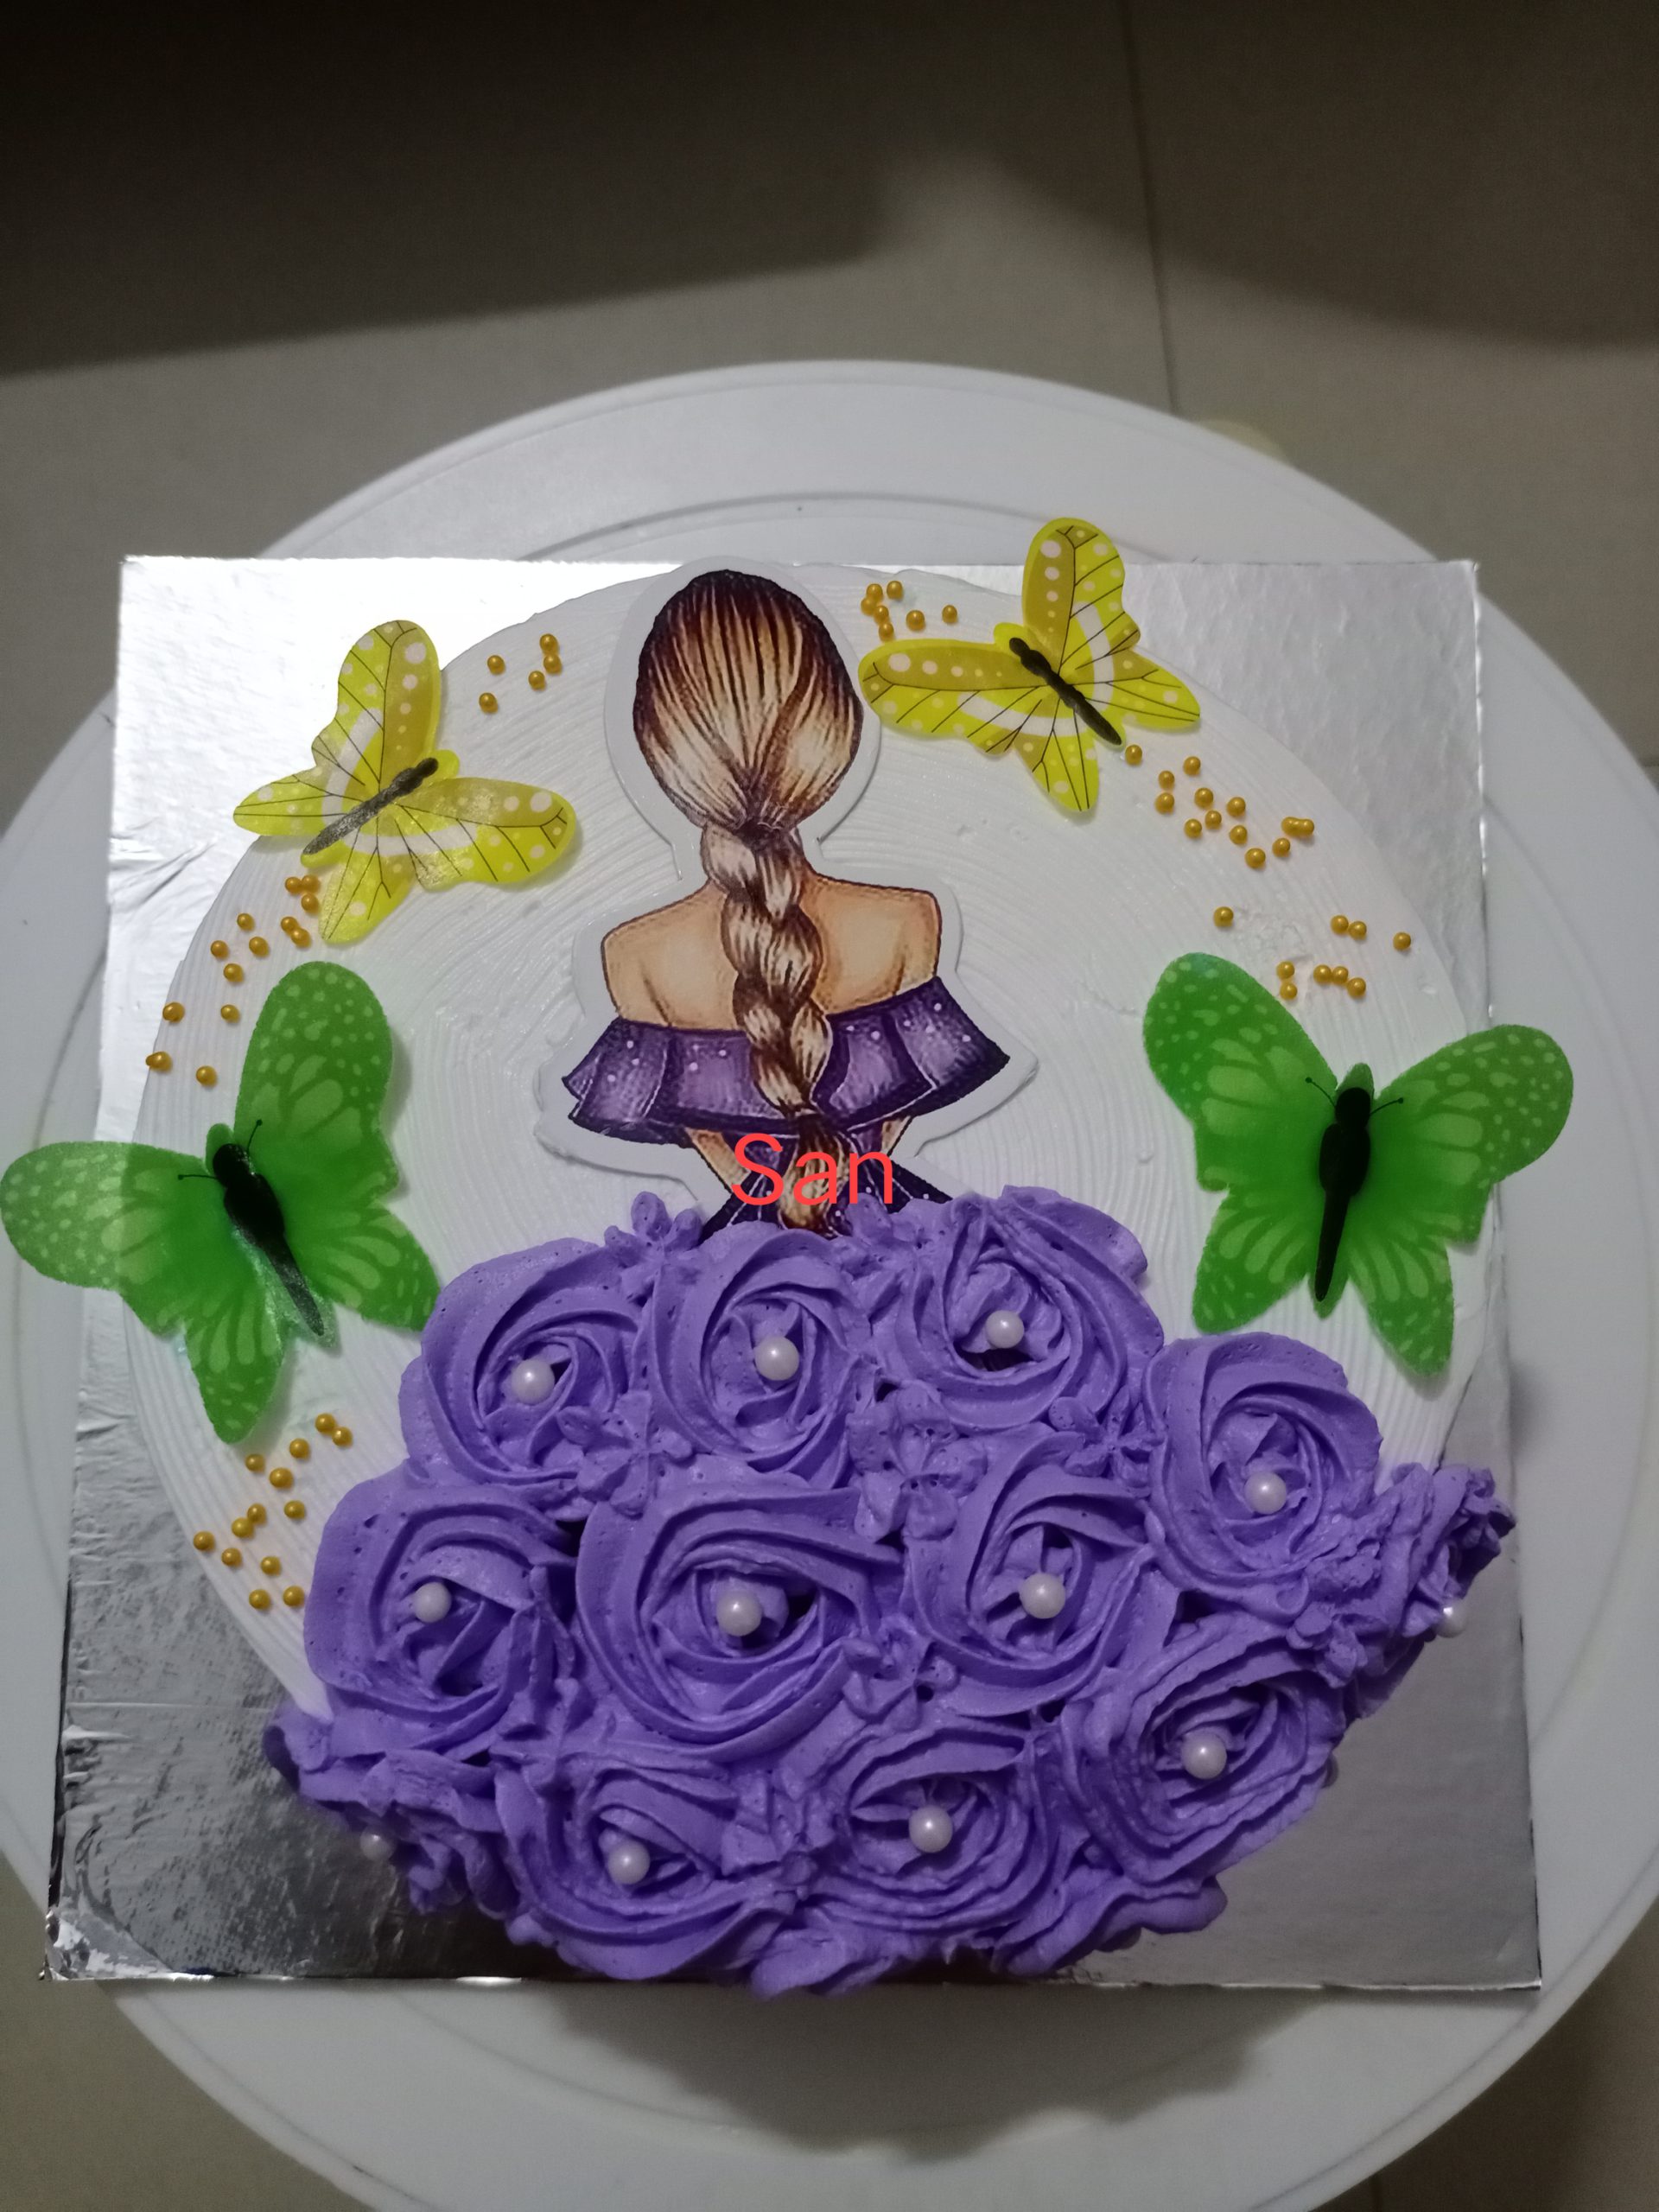 Doll Topper Cake Designs, Images, Price Near Me